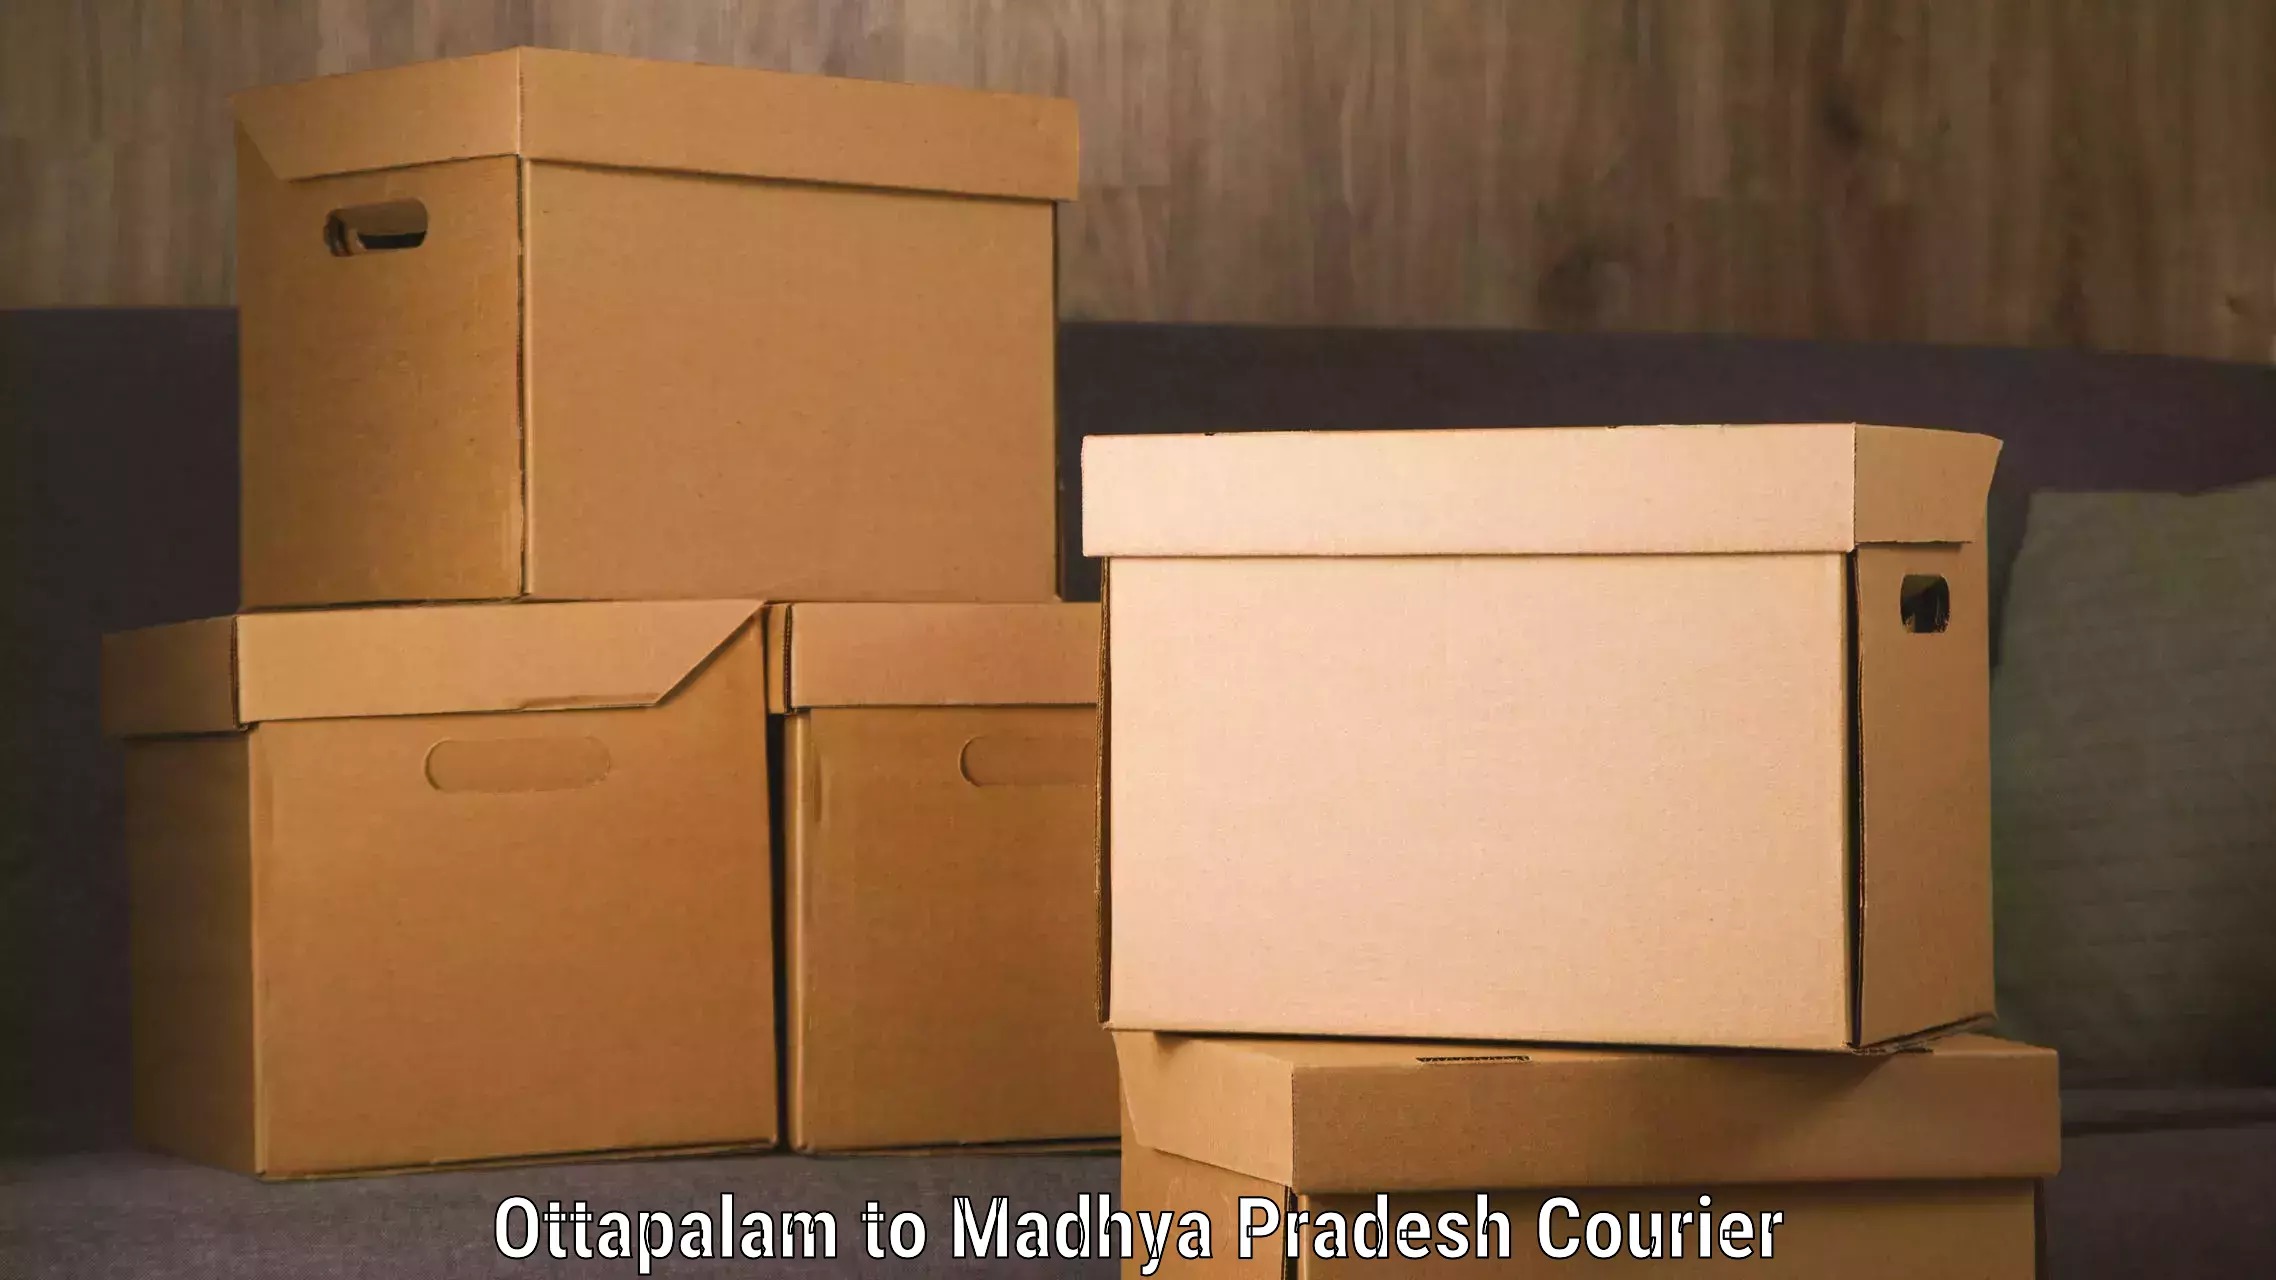 State-of-the-art courier technology Ottapalam to Rahatgarh